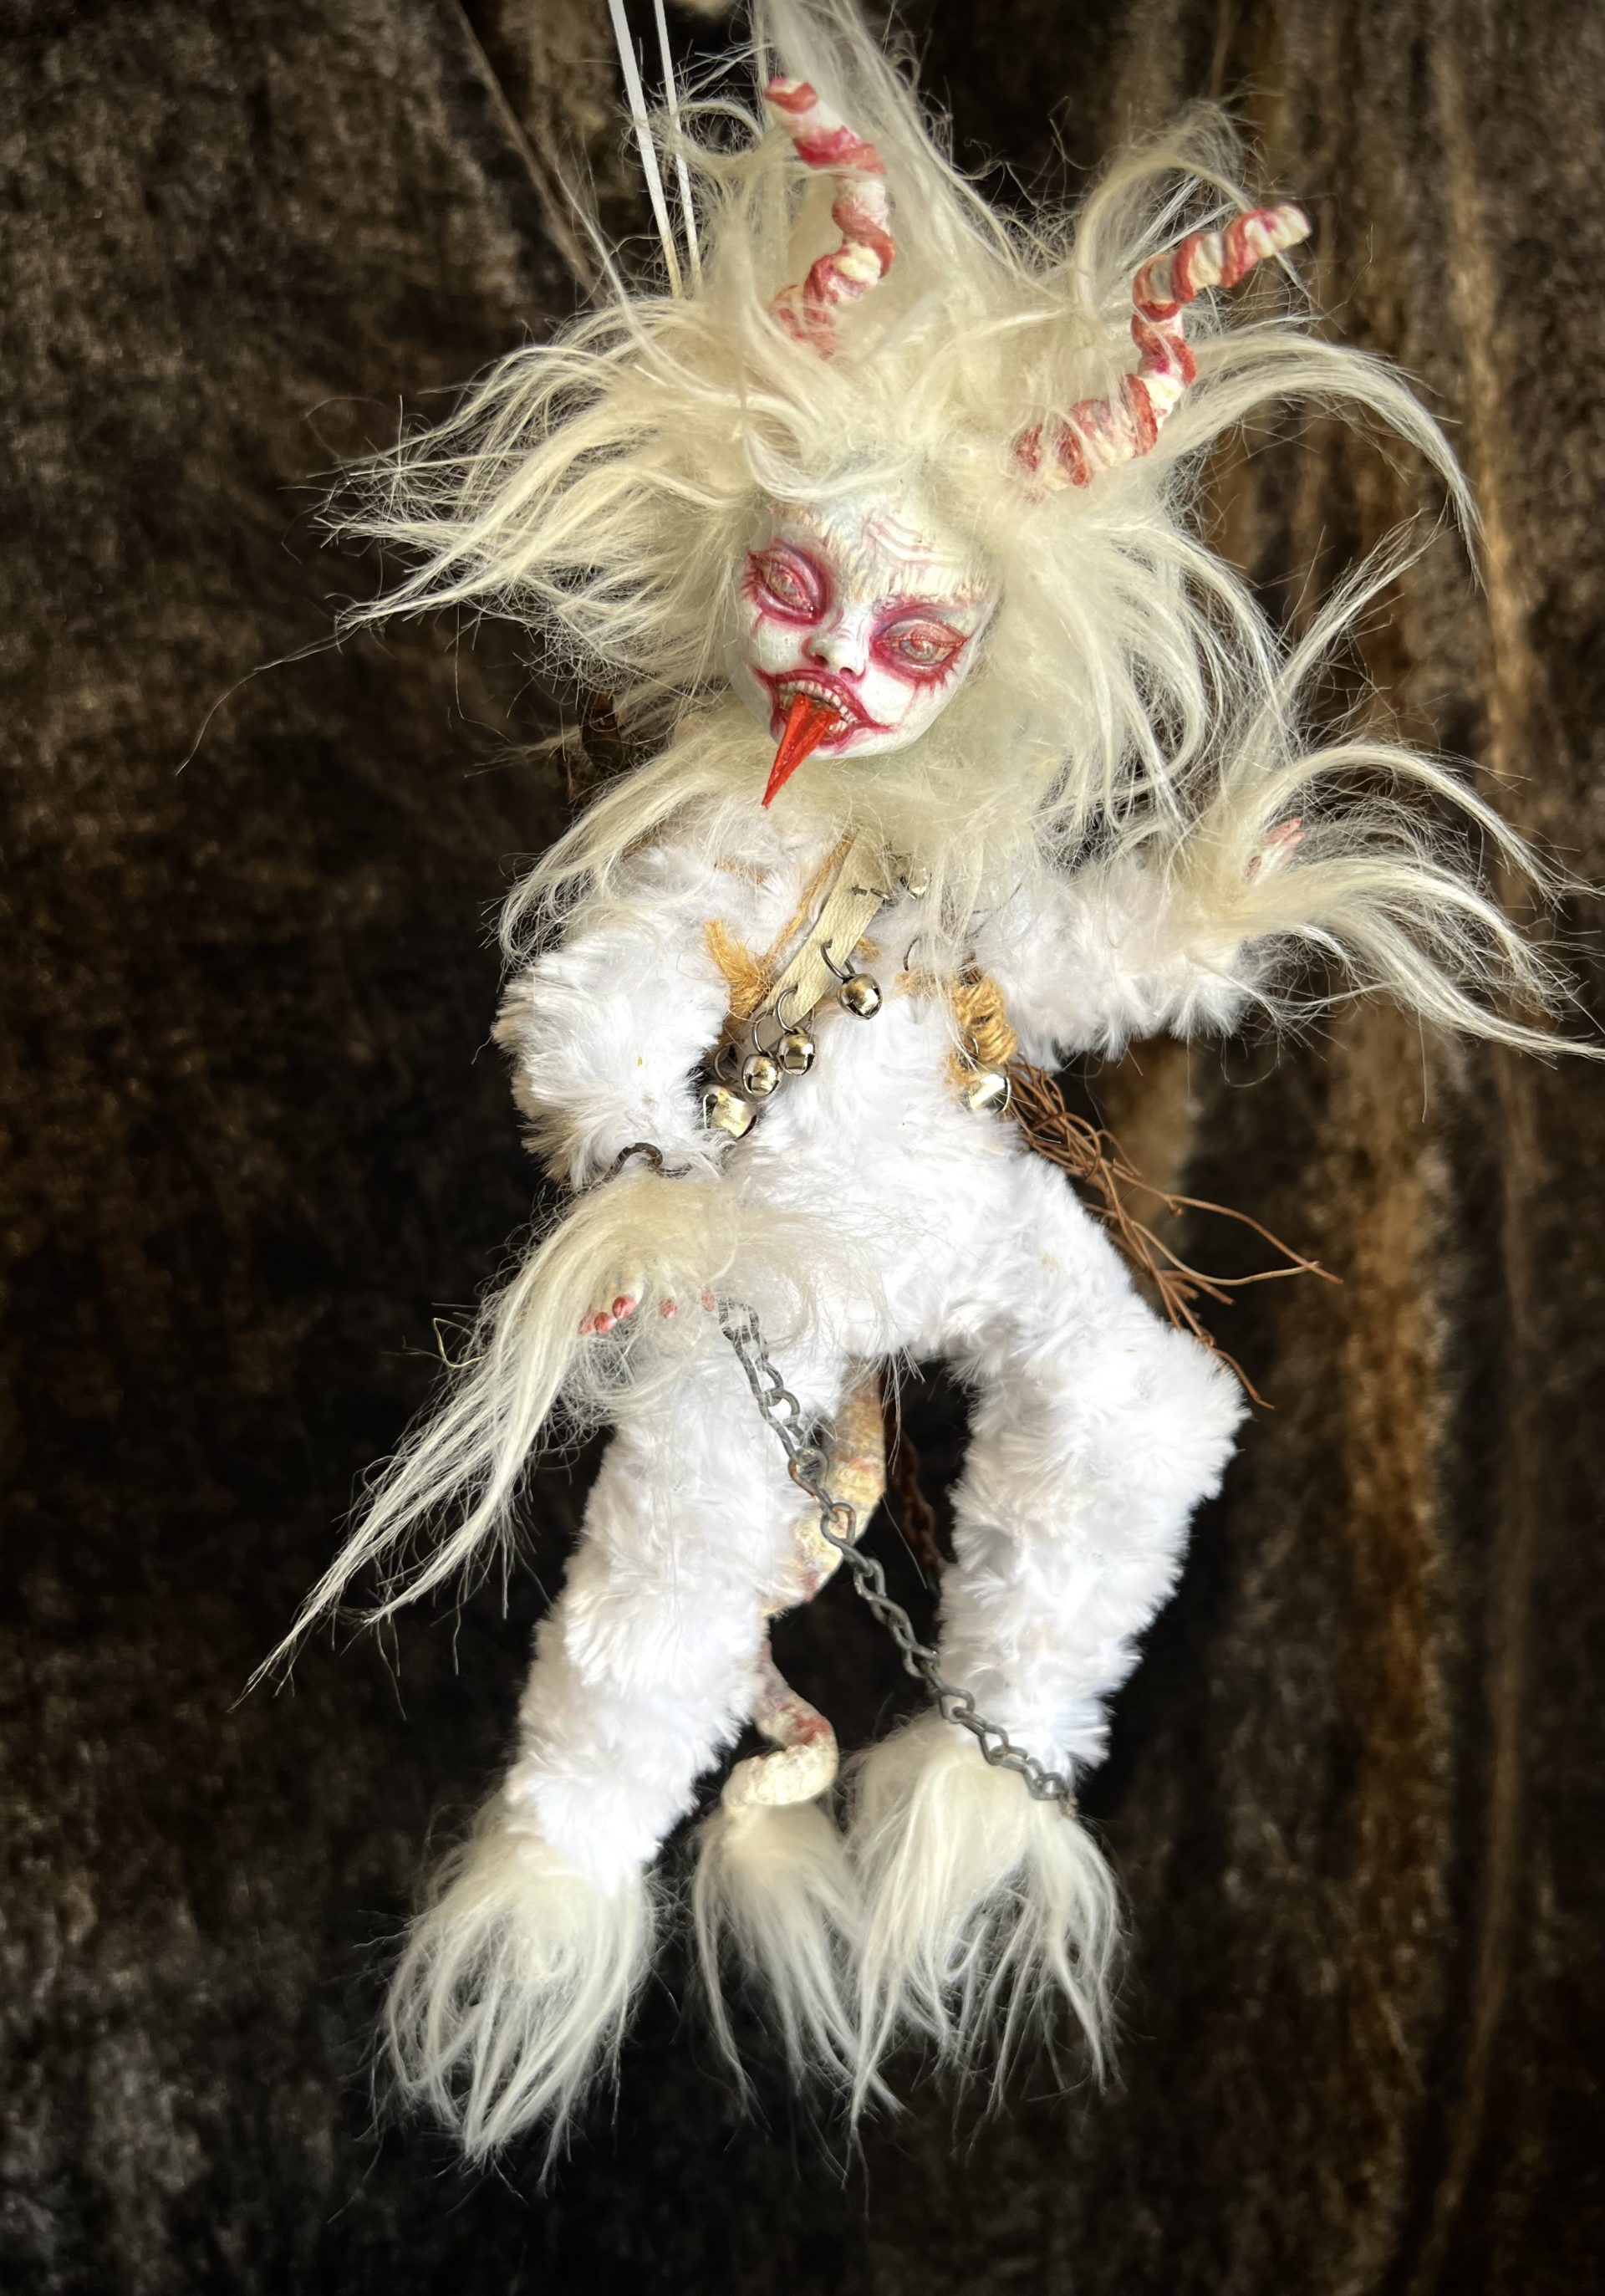 leering white albino krampus art doll with his tonue out white hair and fur, horned, chains